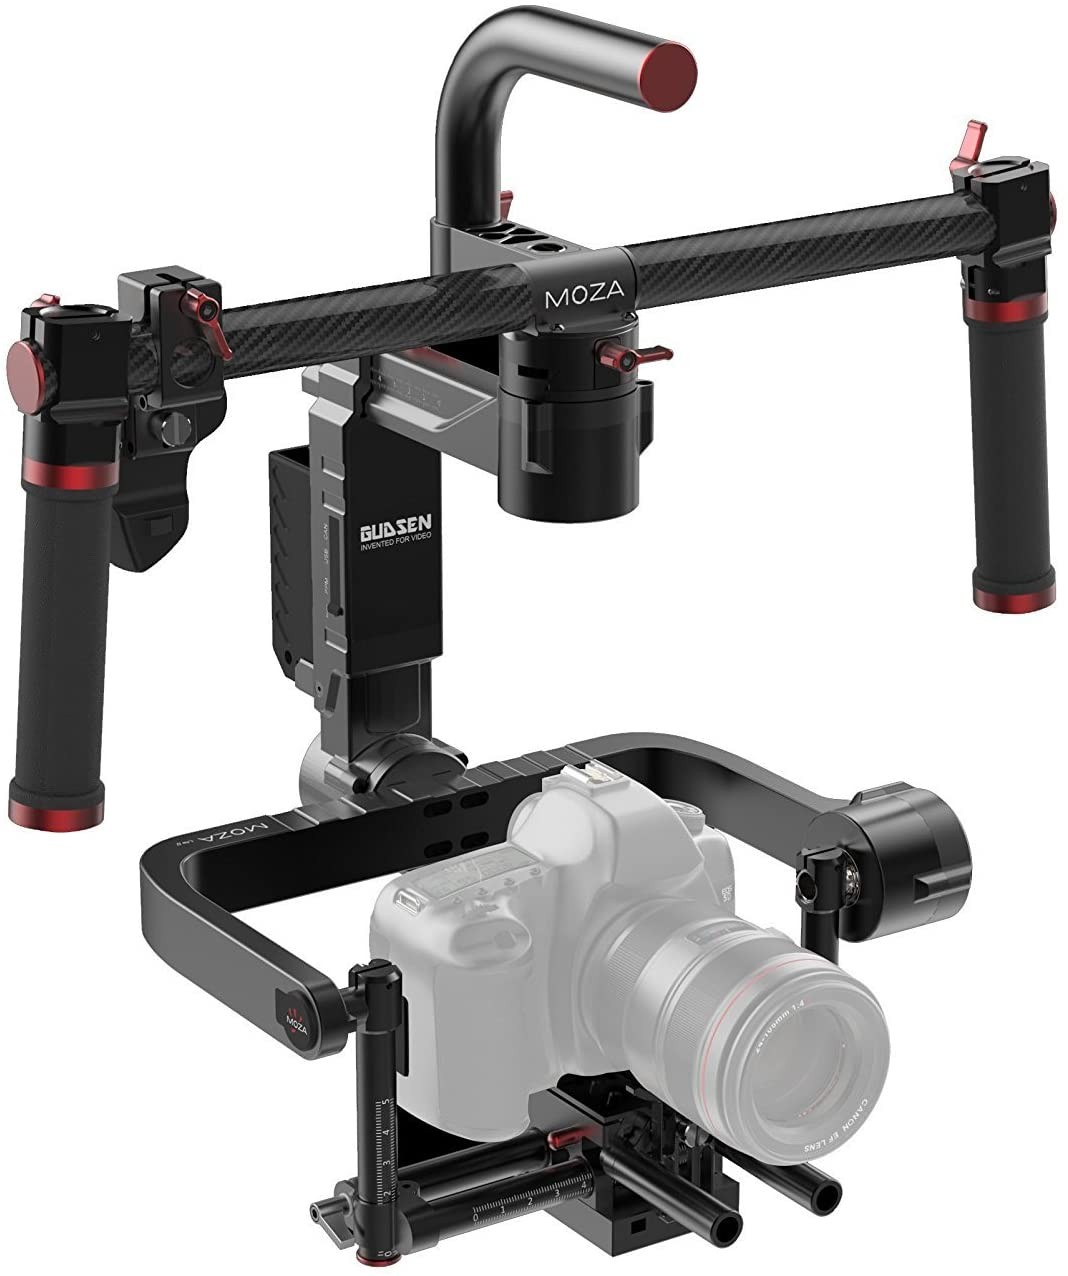 Premium Kit 3-Axis Motorized Handheld Gimbal Brushless Stabilizer Support Max.Payload 11lb/5kg